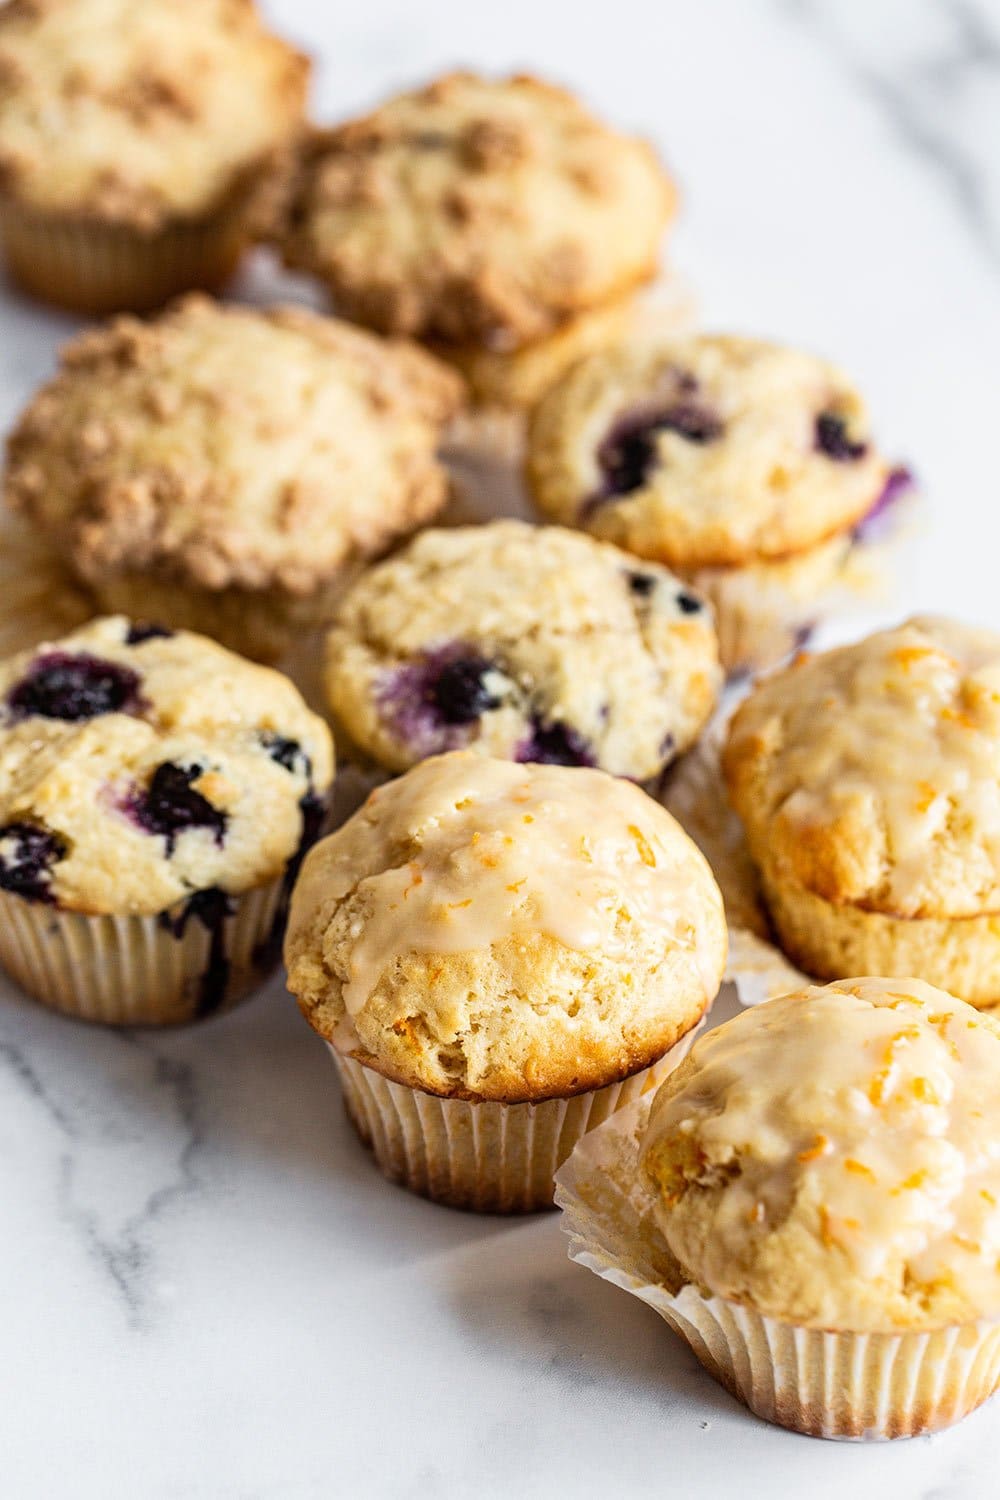 homemade blueberry, lemon and crumb cake muffins, perfect for breakfast or brunch on Easter